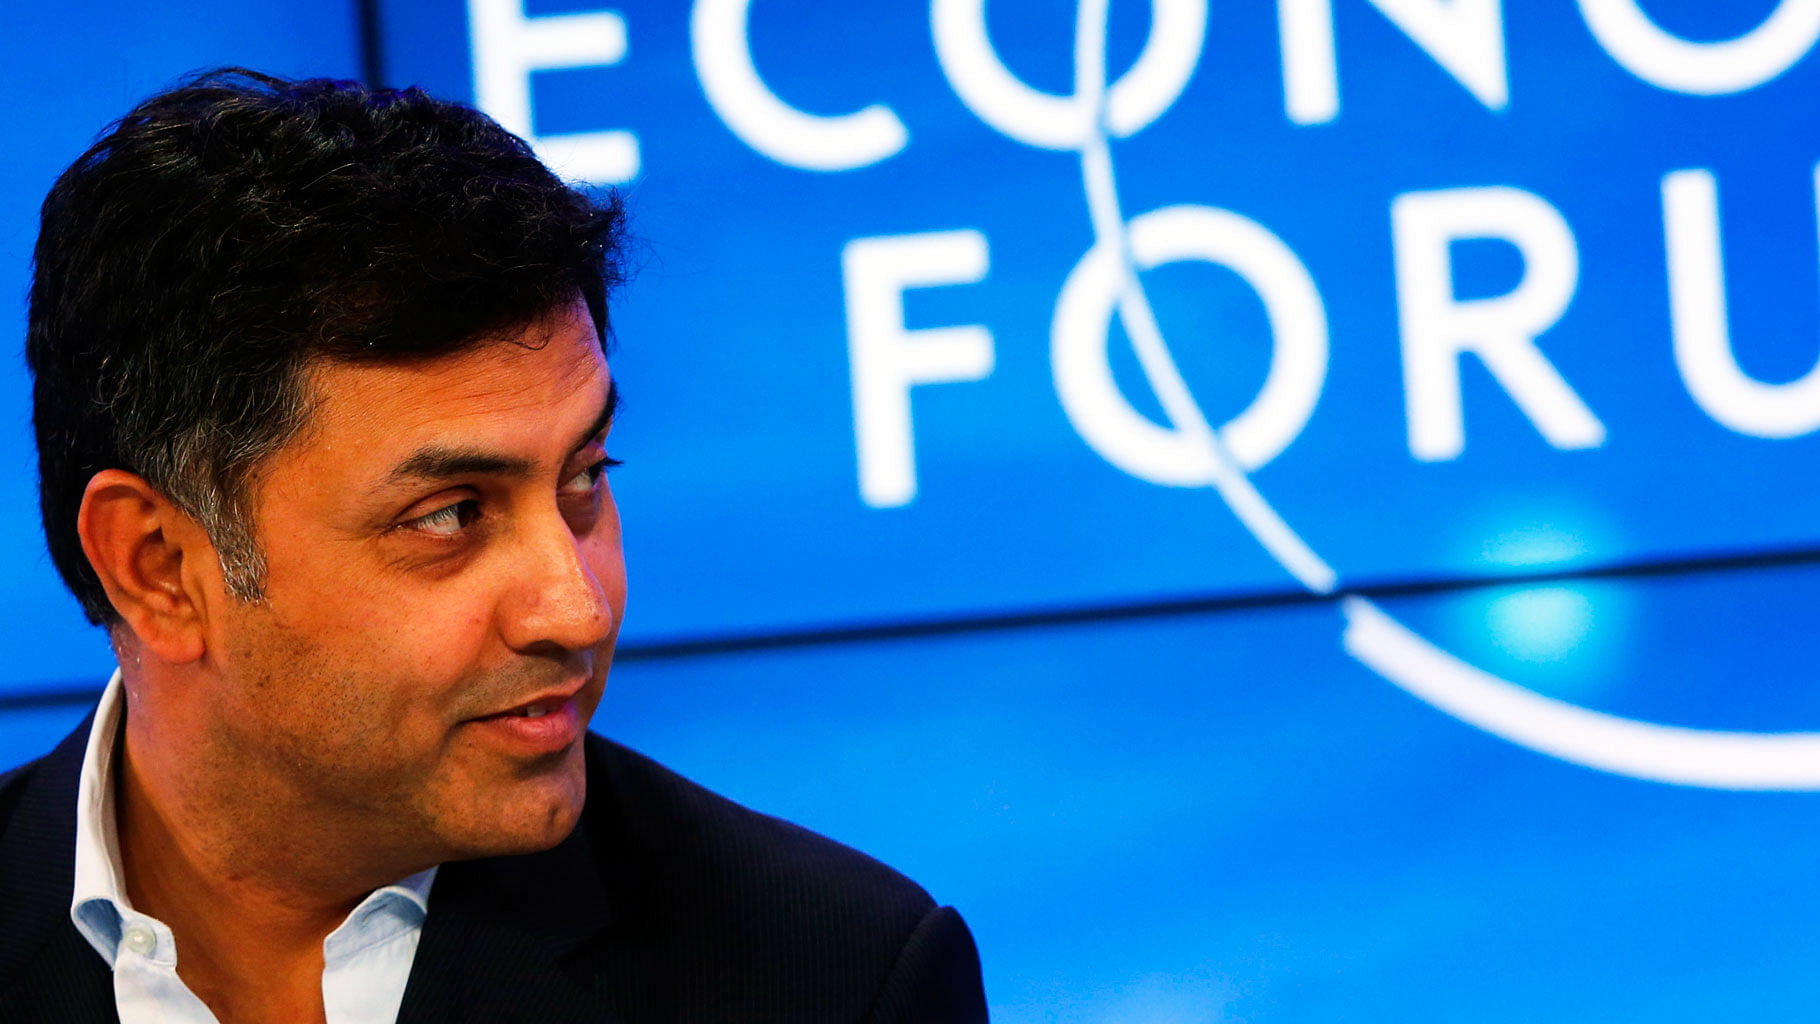 

Nikesh Arora has faced criticism for allegedly “poor investment performance and a series of questionable transactions” during his tenure. (Photo: Reuters)